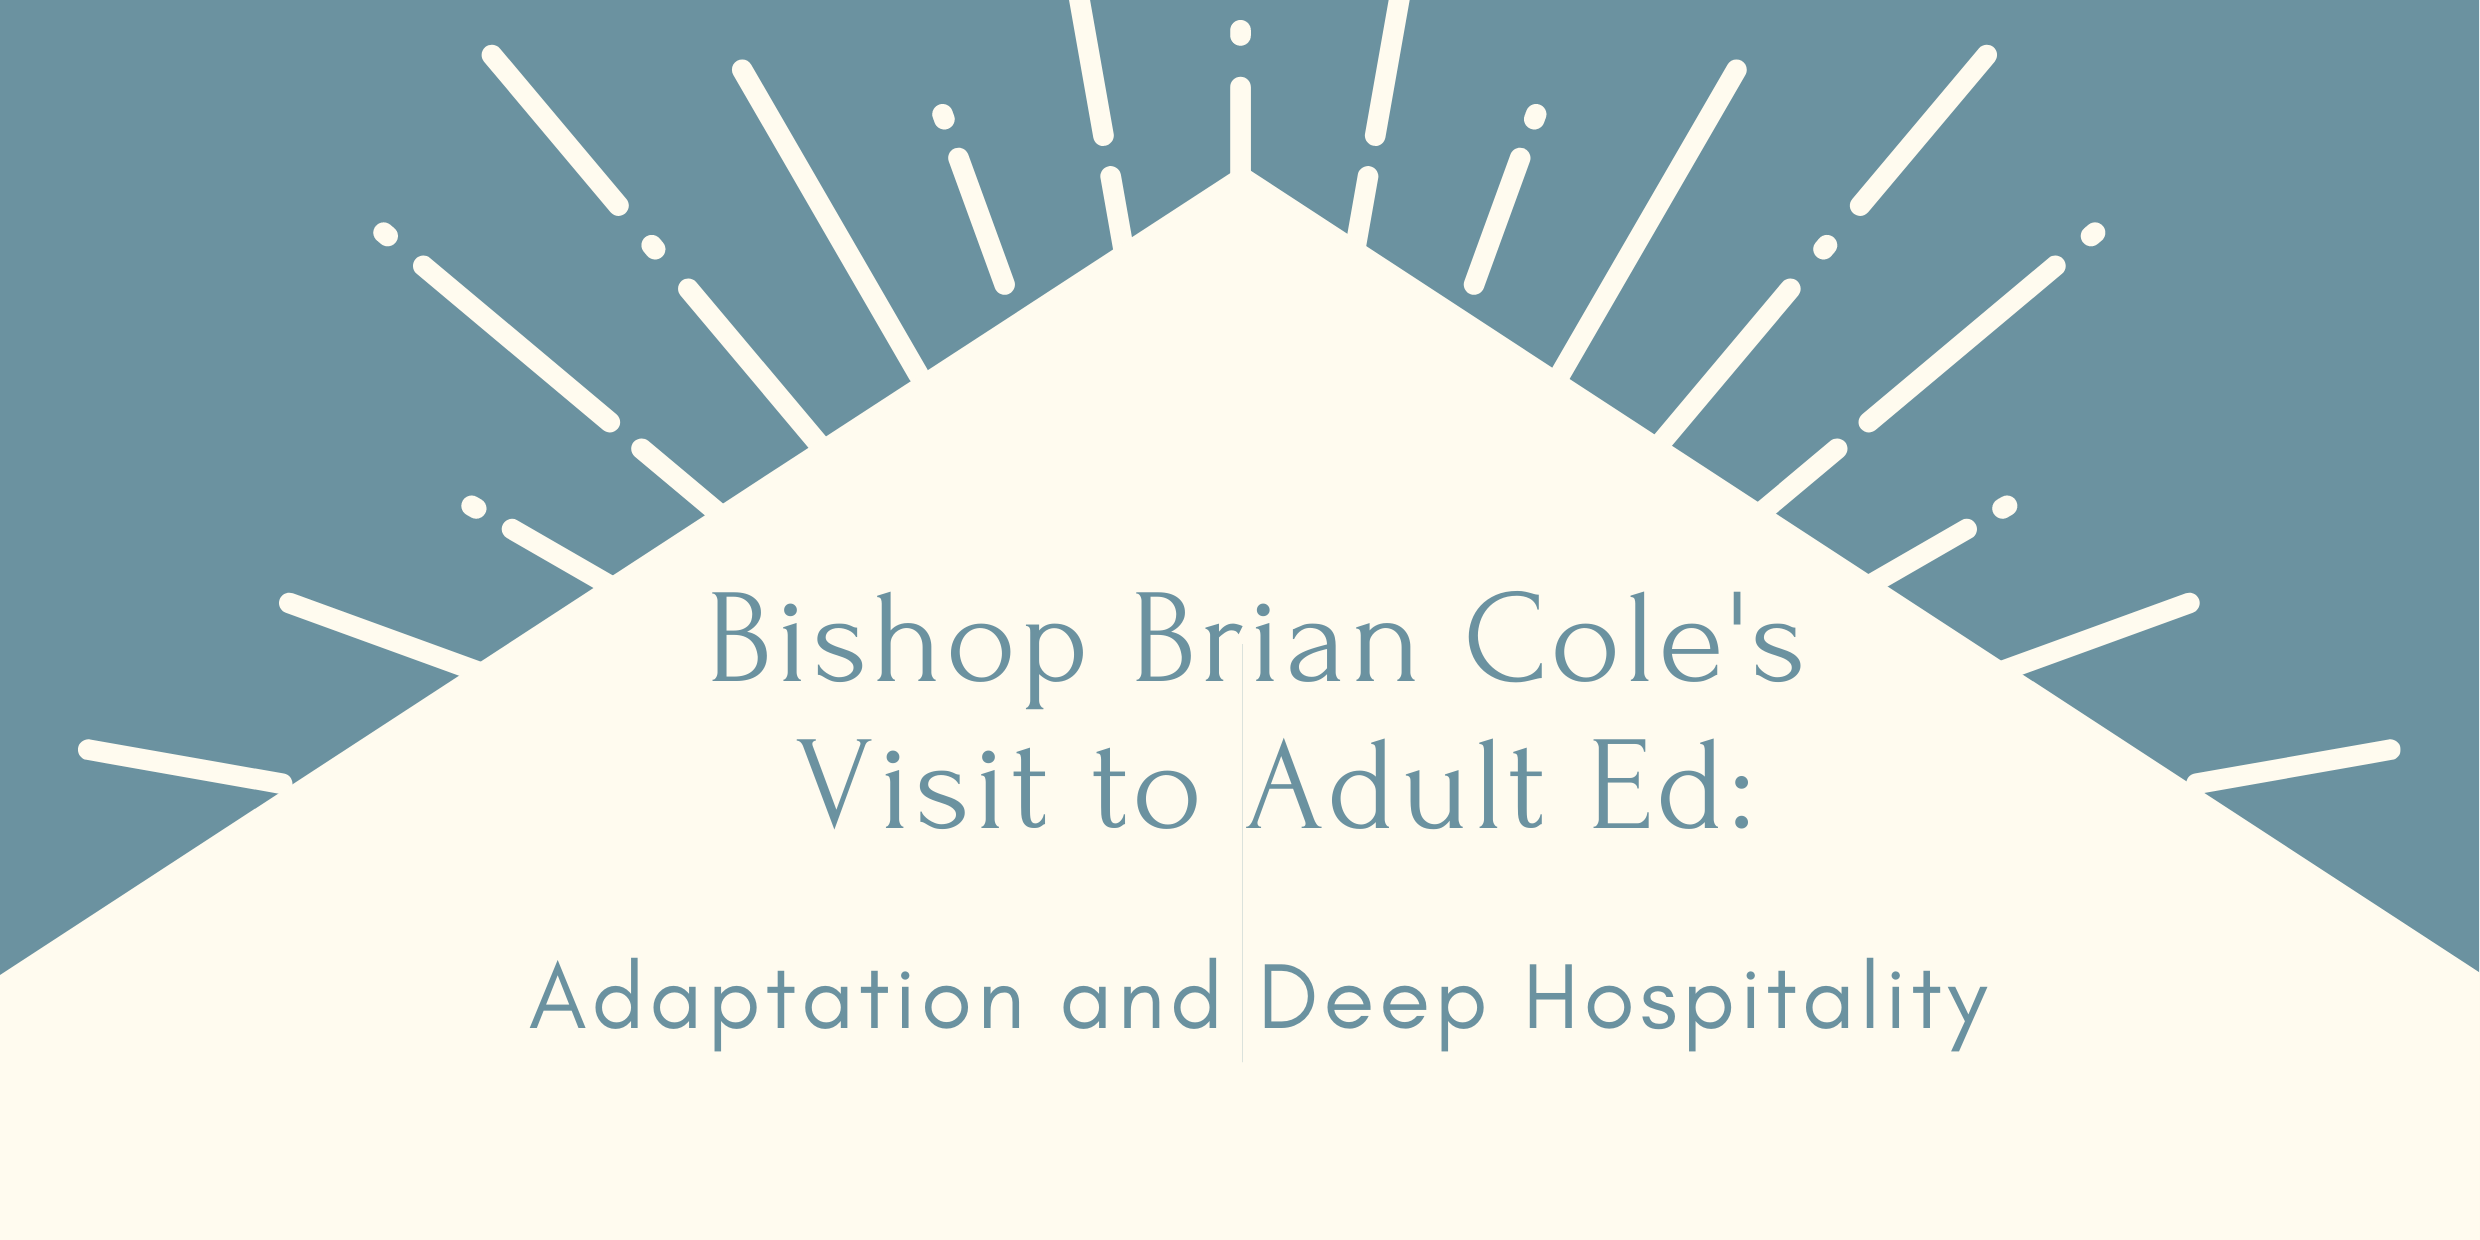 A title card saying "Bishop's Visit to Adult Ed: Adaptation and Deep Hospitality"